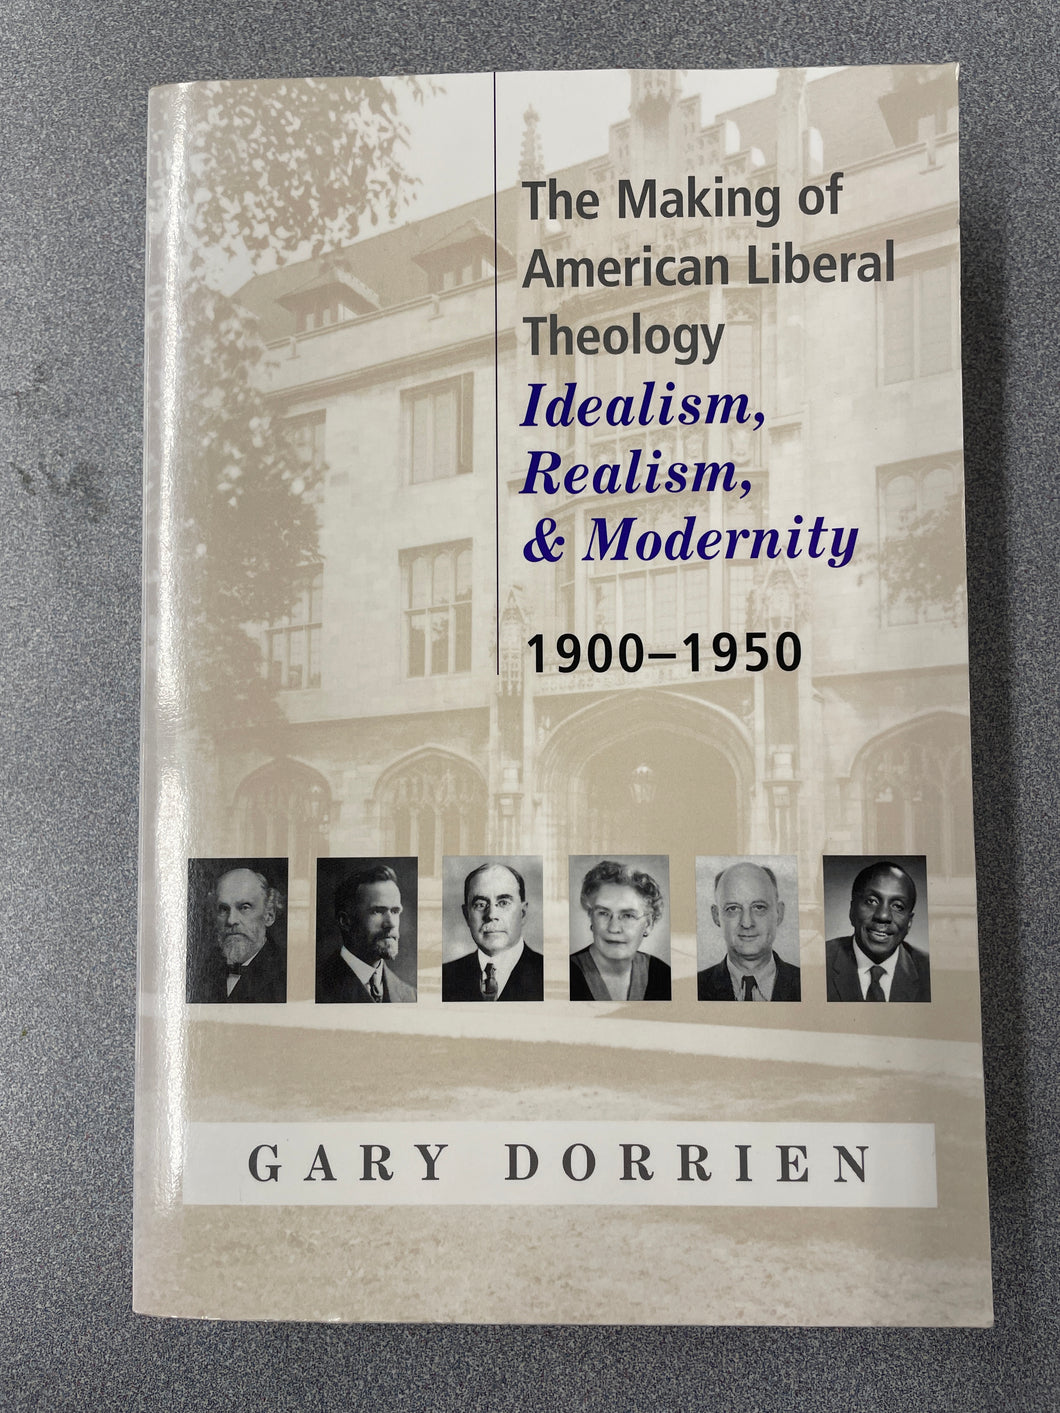 RS The Making of the American Liberal Theology; Idealism, Realism & Modernity, 1900-1950, Dorrien, Gary [2003] N 4/24